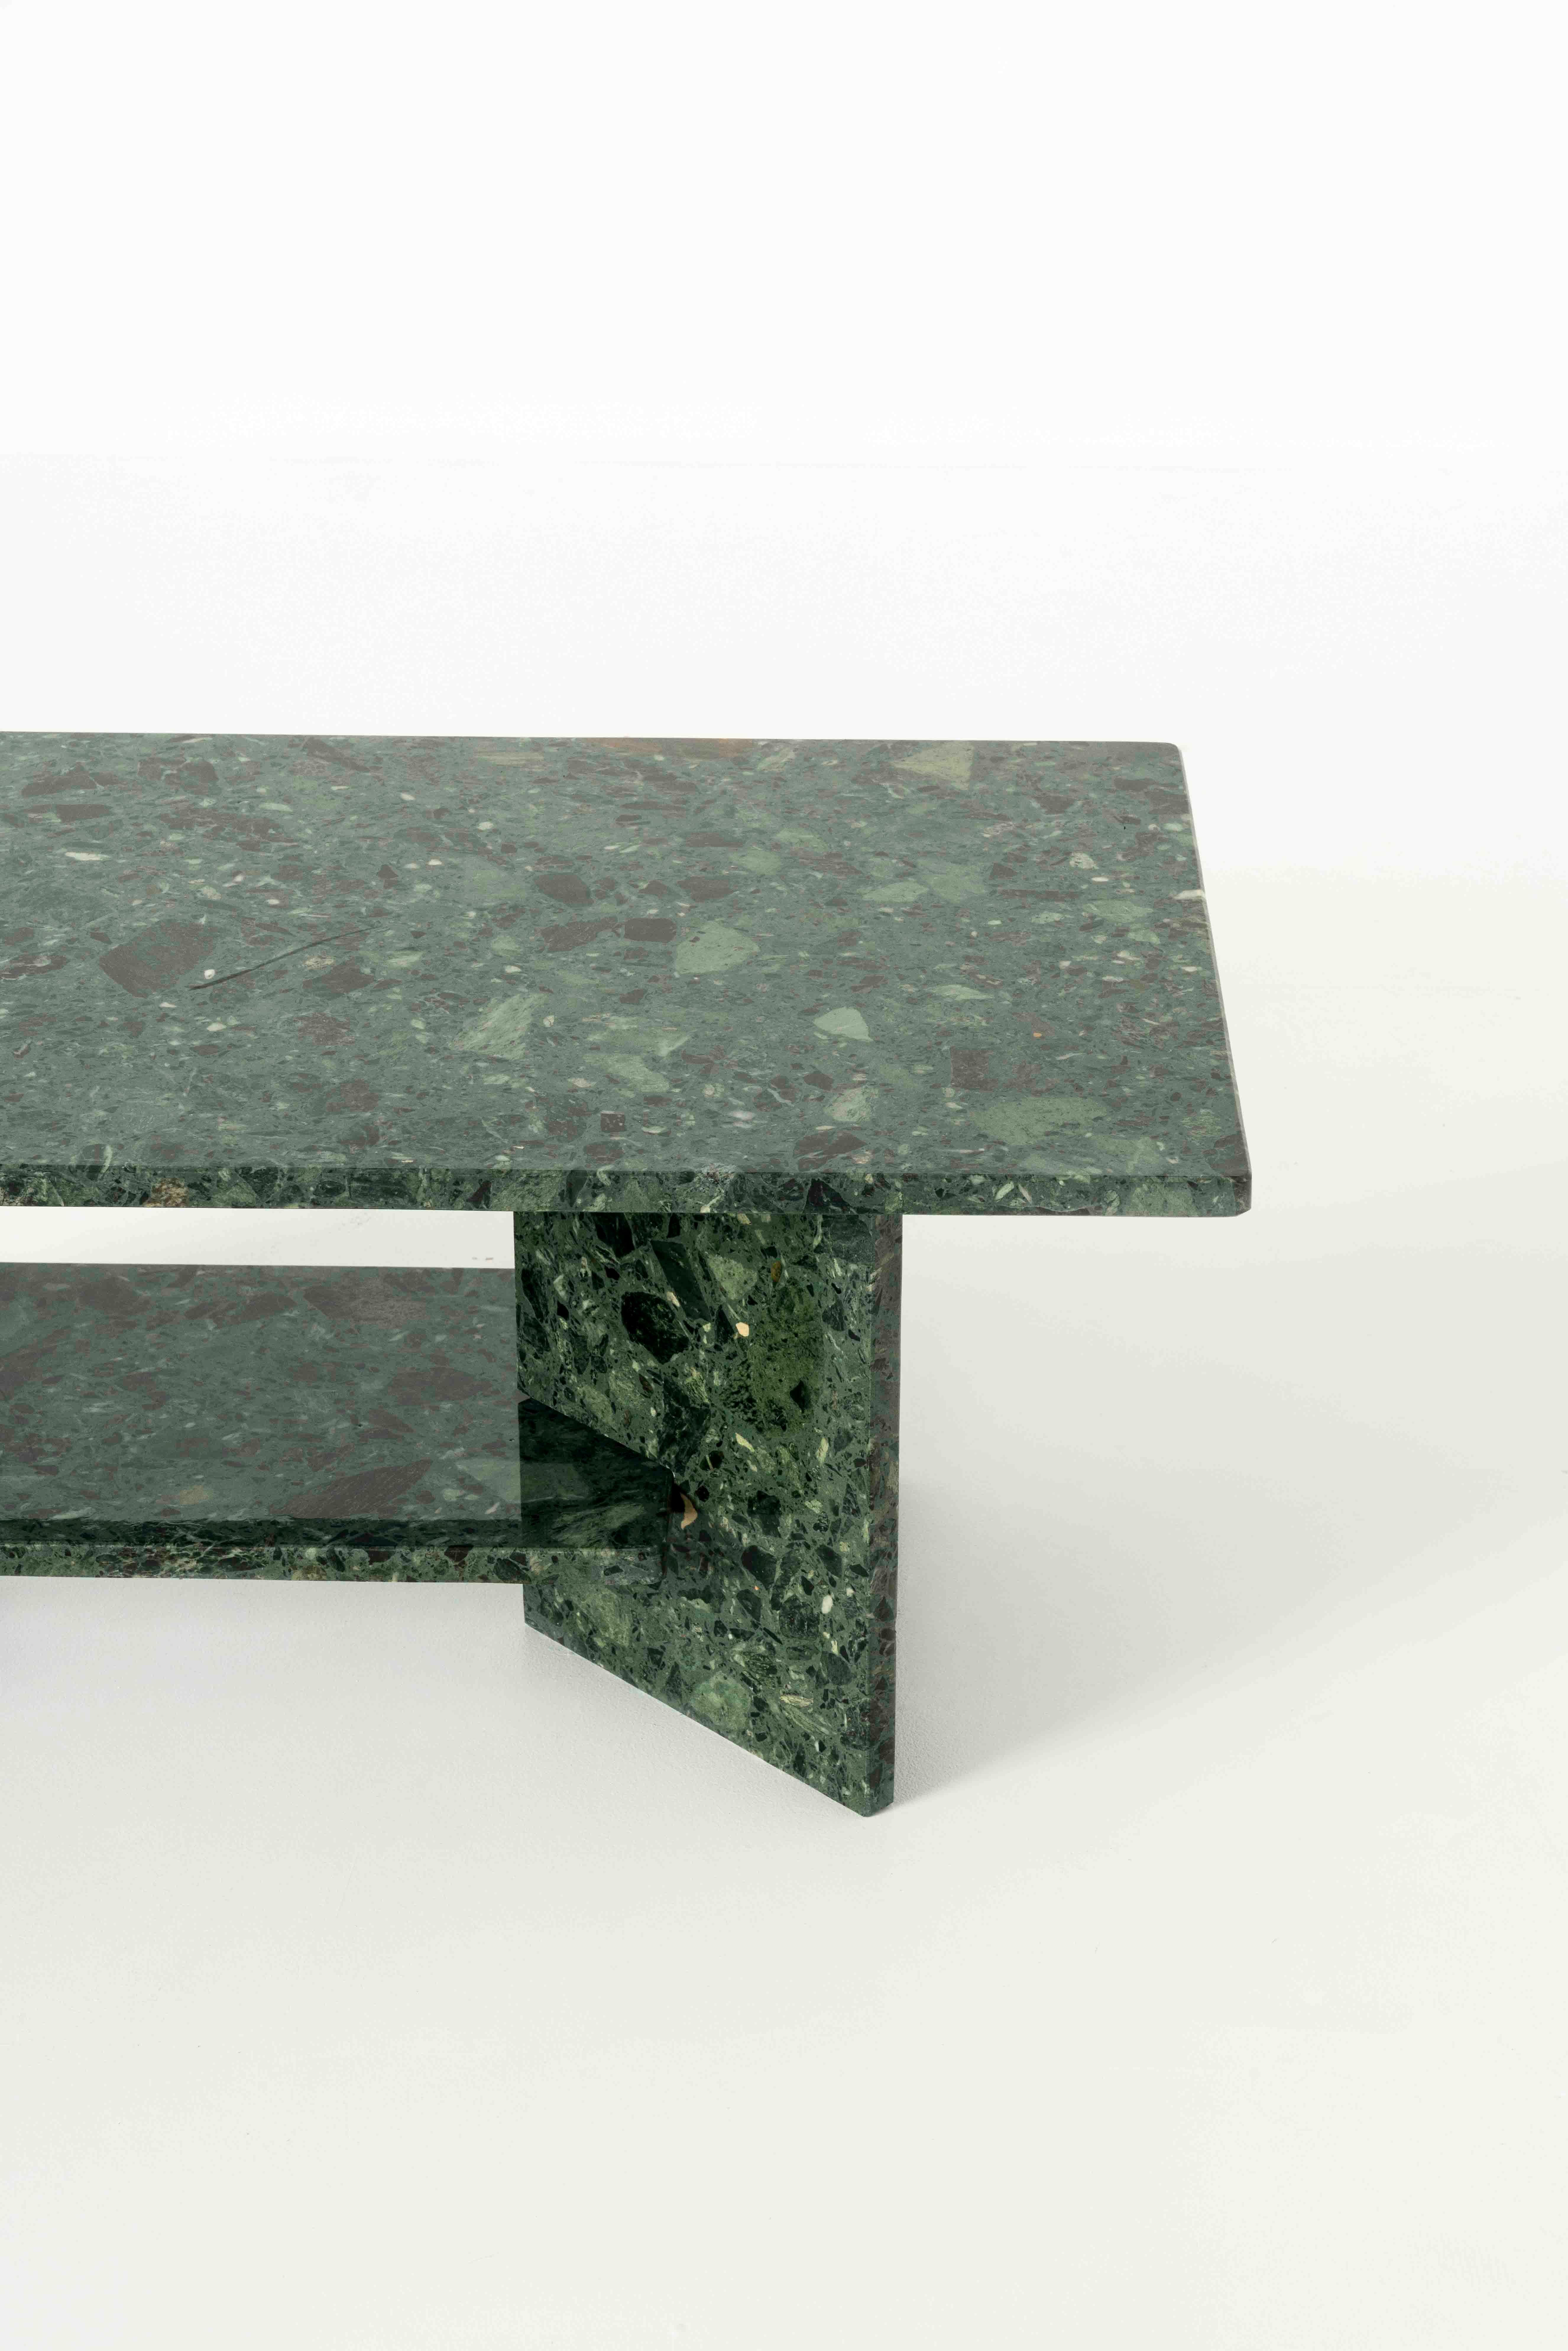 Italian Vintage Green Marble Coffee Table, 1980s For Sale 5